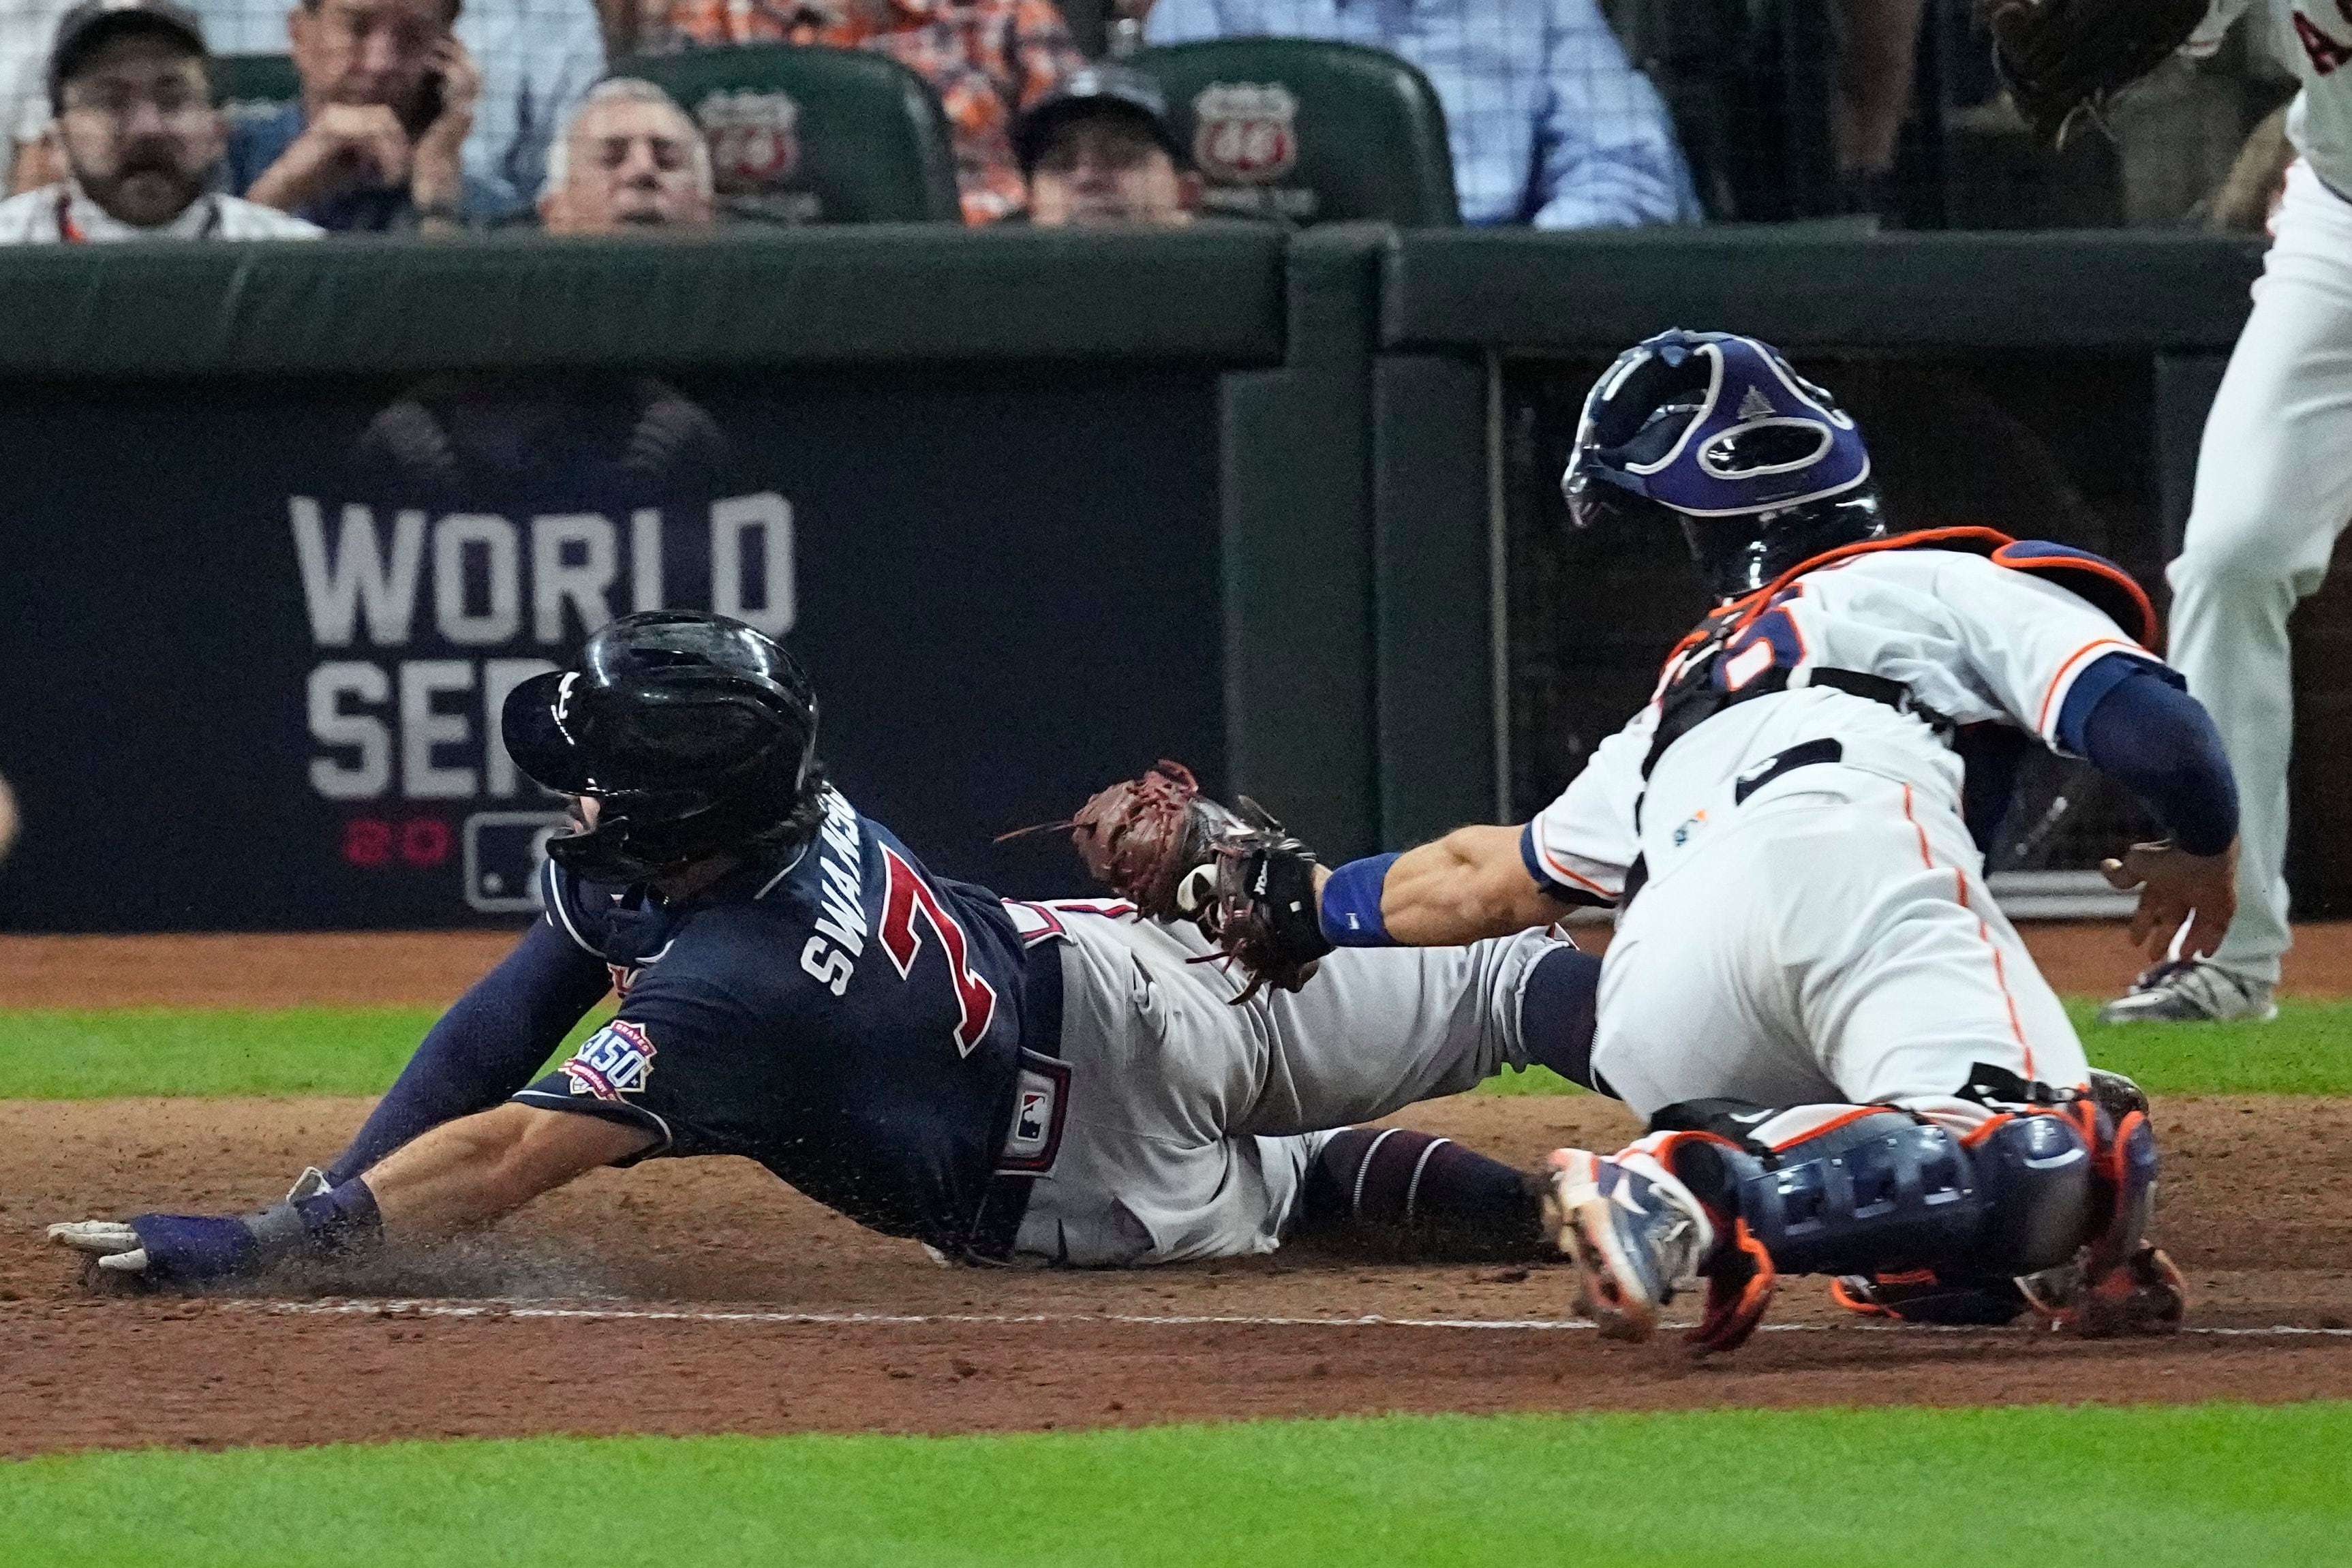 Baseball Kicks off the World Series with the Braves and Astros